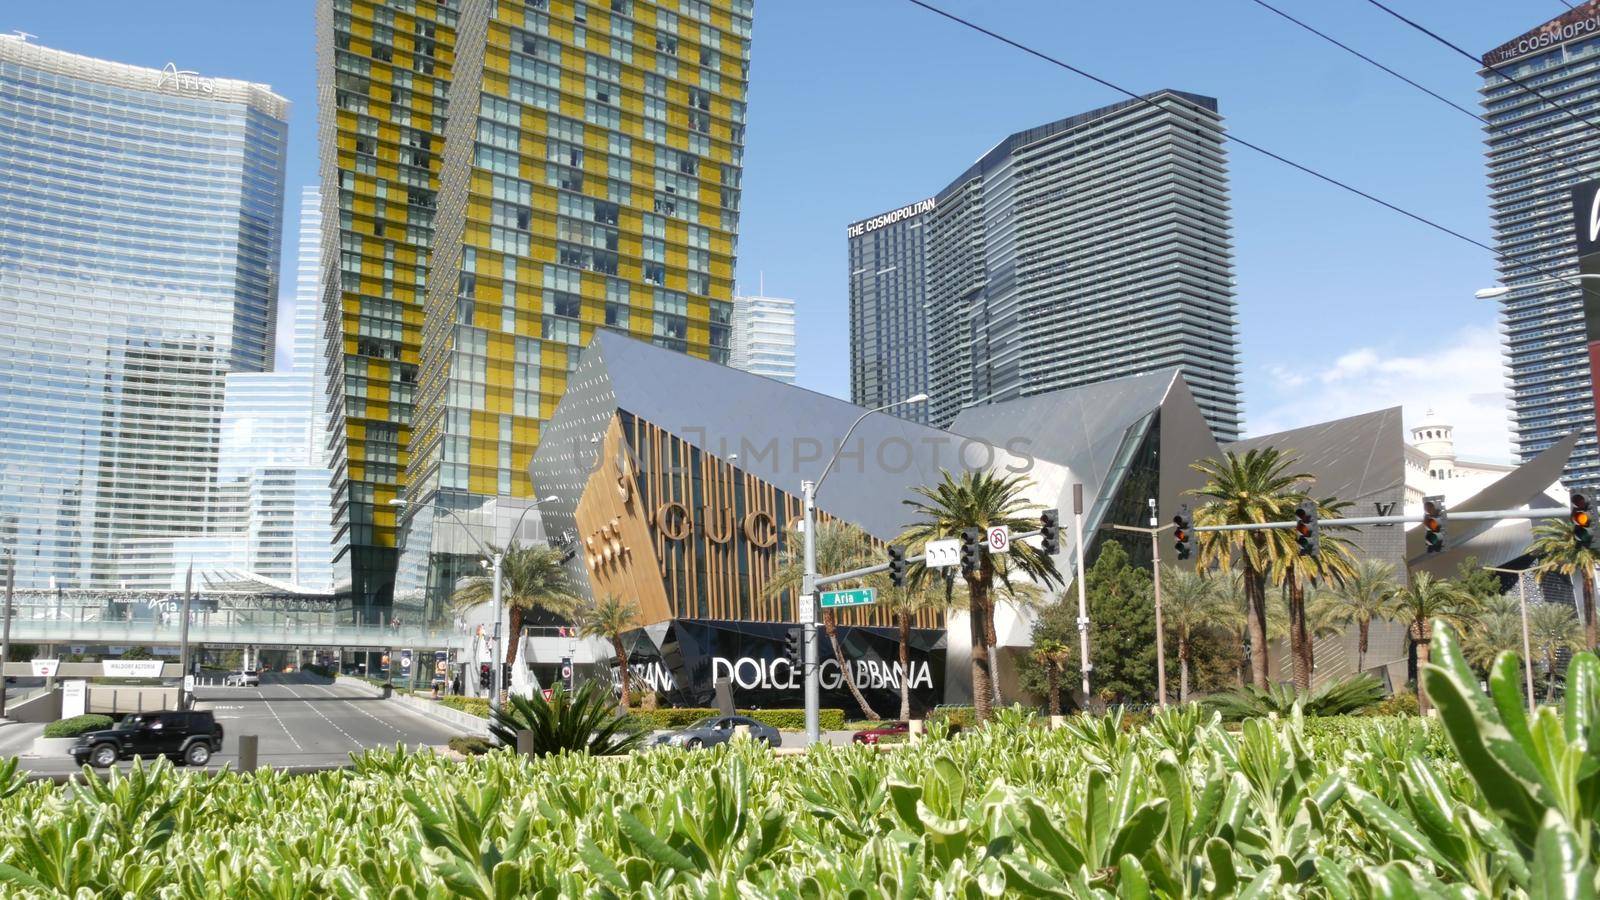 LAS VEGAS, NEVADA USA - 7 MAR 2020: Futuristic CityCenter casinos in sin city. Modern luxury unincorporated urban skyline. Contemporary metropolis highrise skyscrapers and Crystals rich shopping mall by DogoraSun